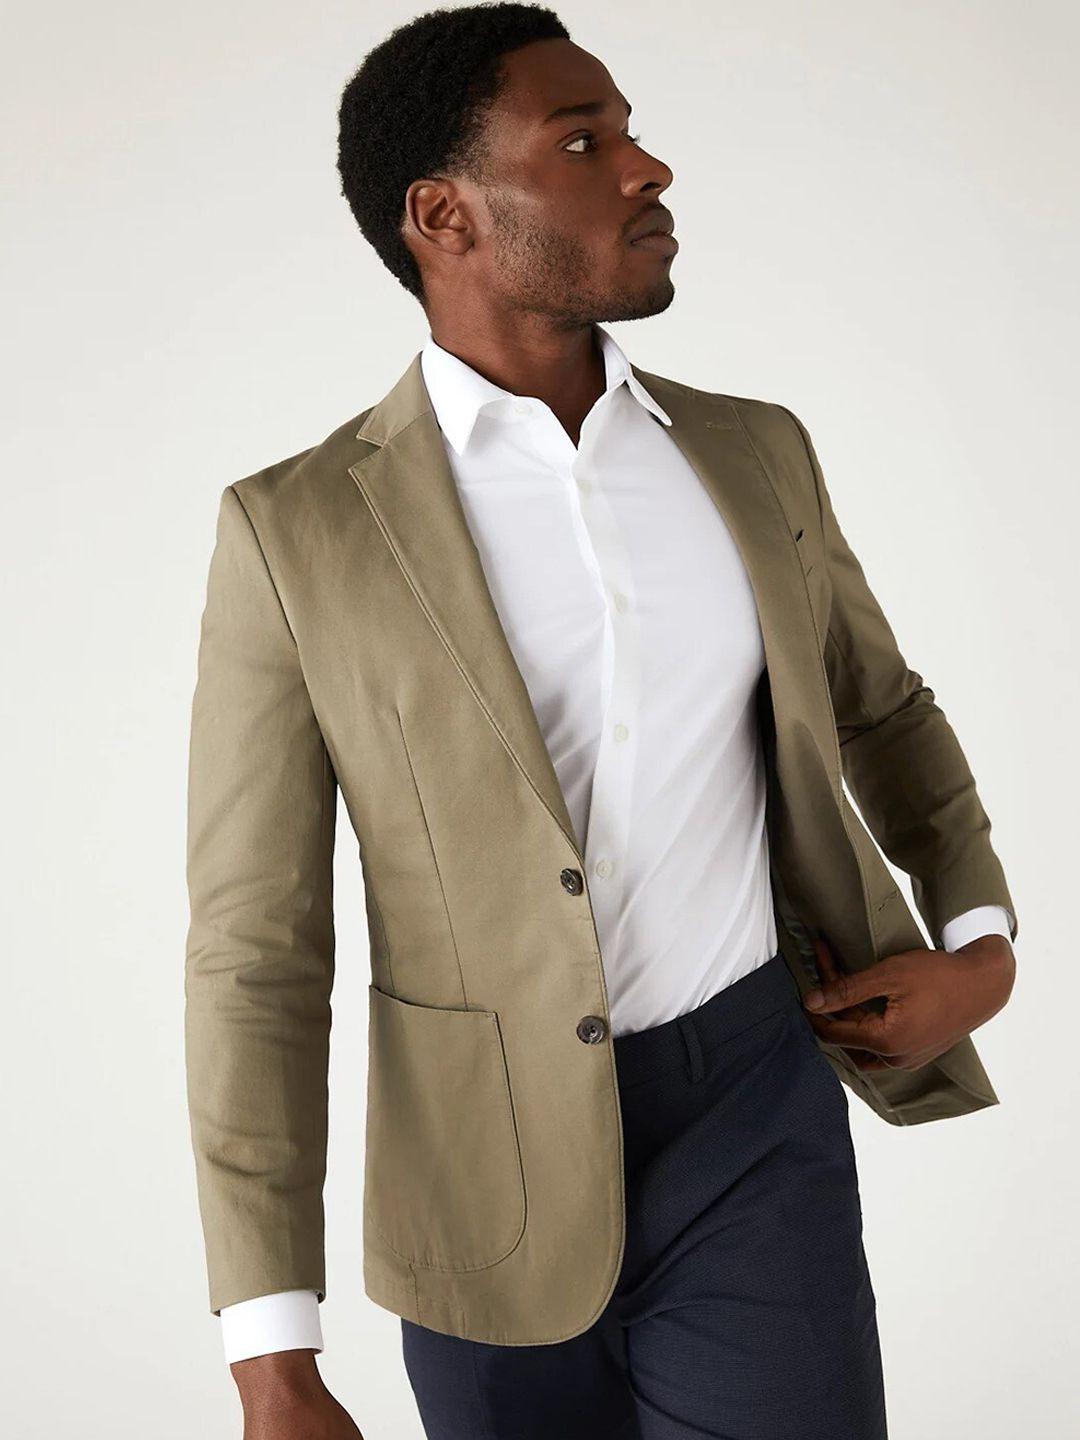 marks & spencer notched lapel single breasted blazers